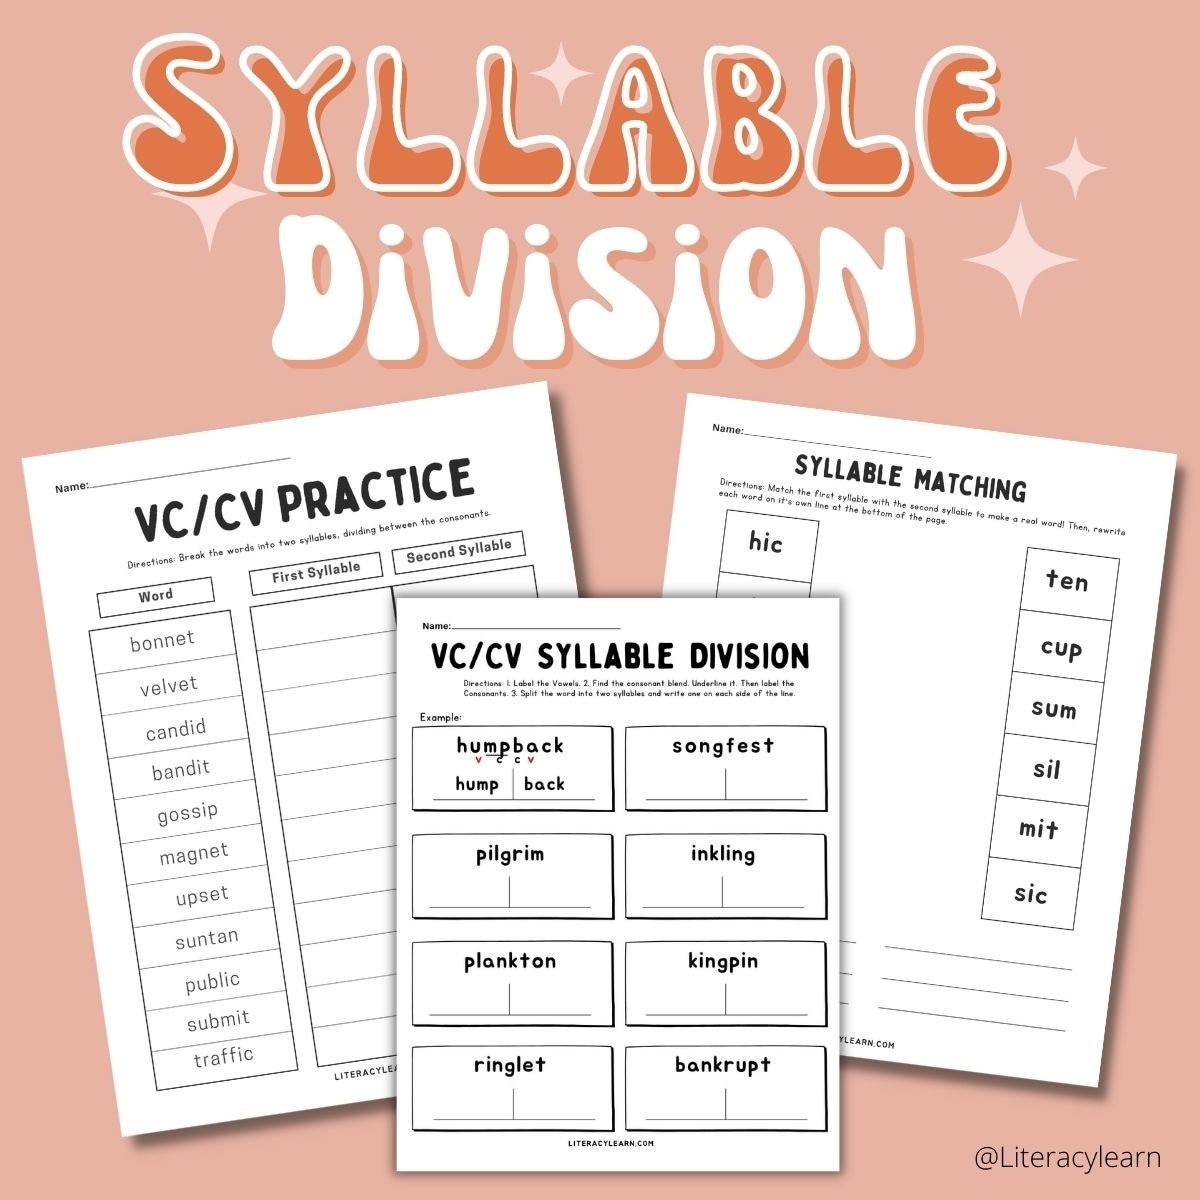 Three worksheets on a pink background with "Syllable Division" in bubble letters.